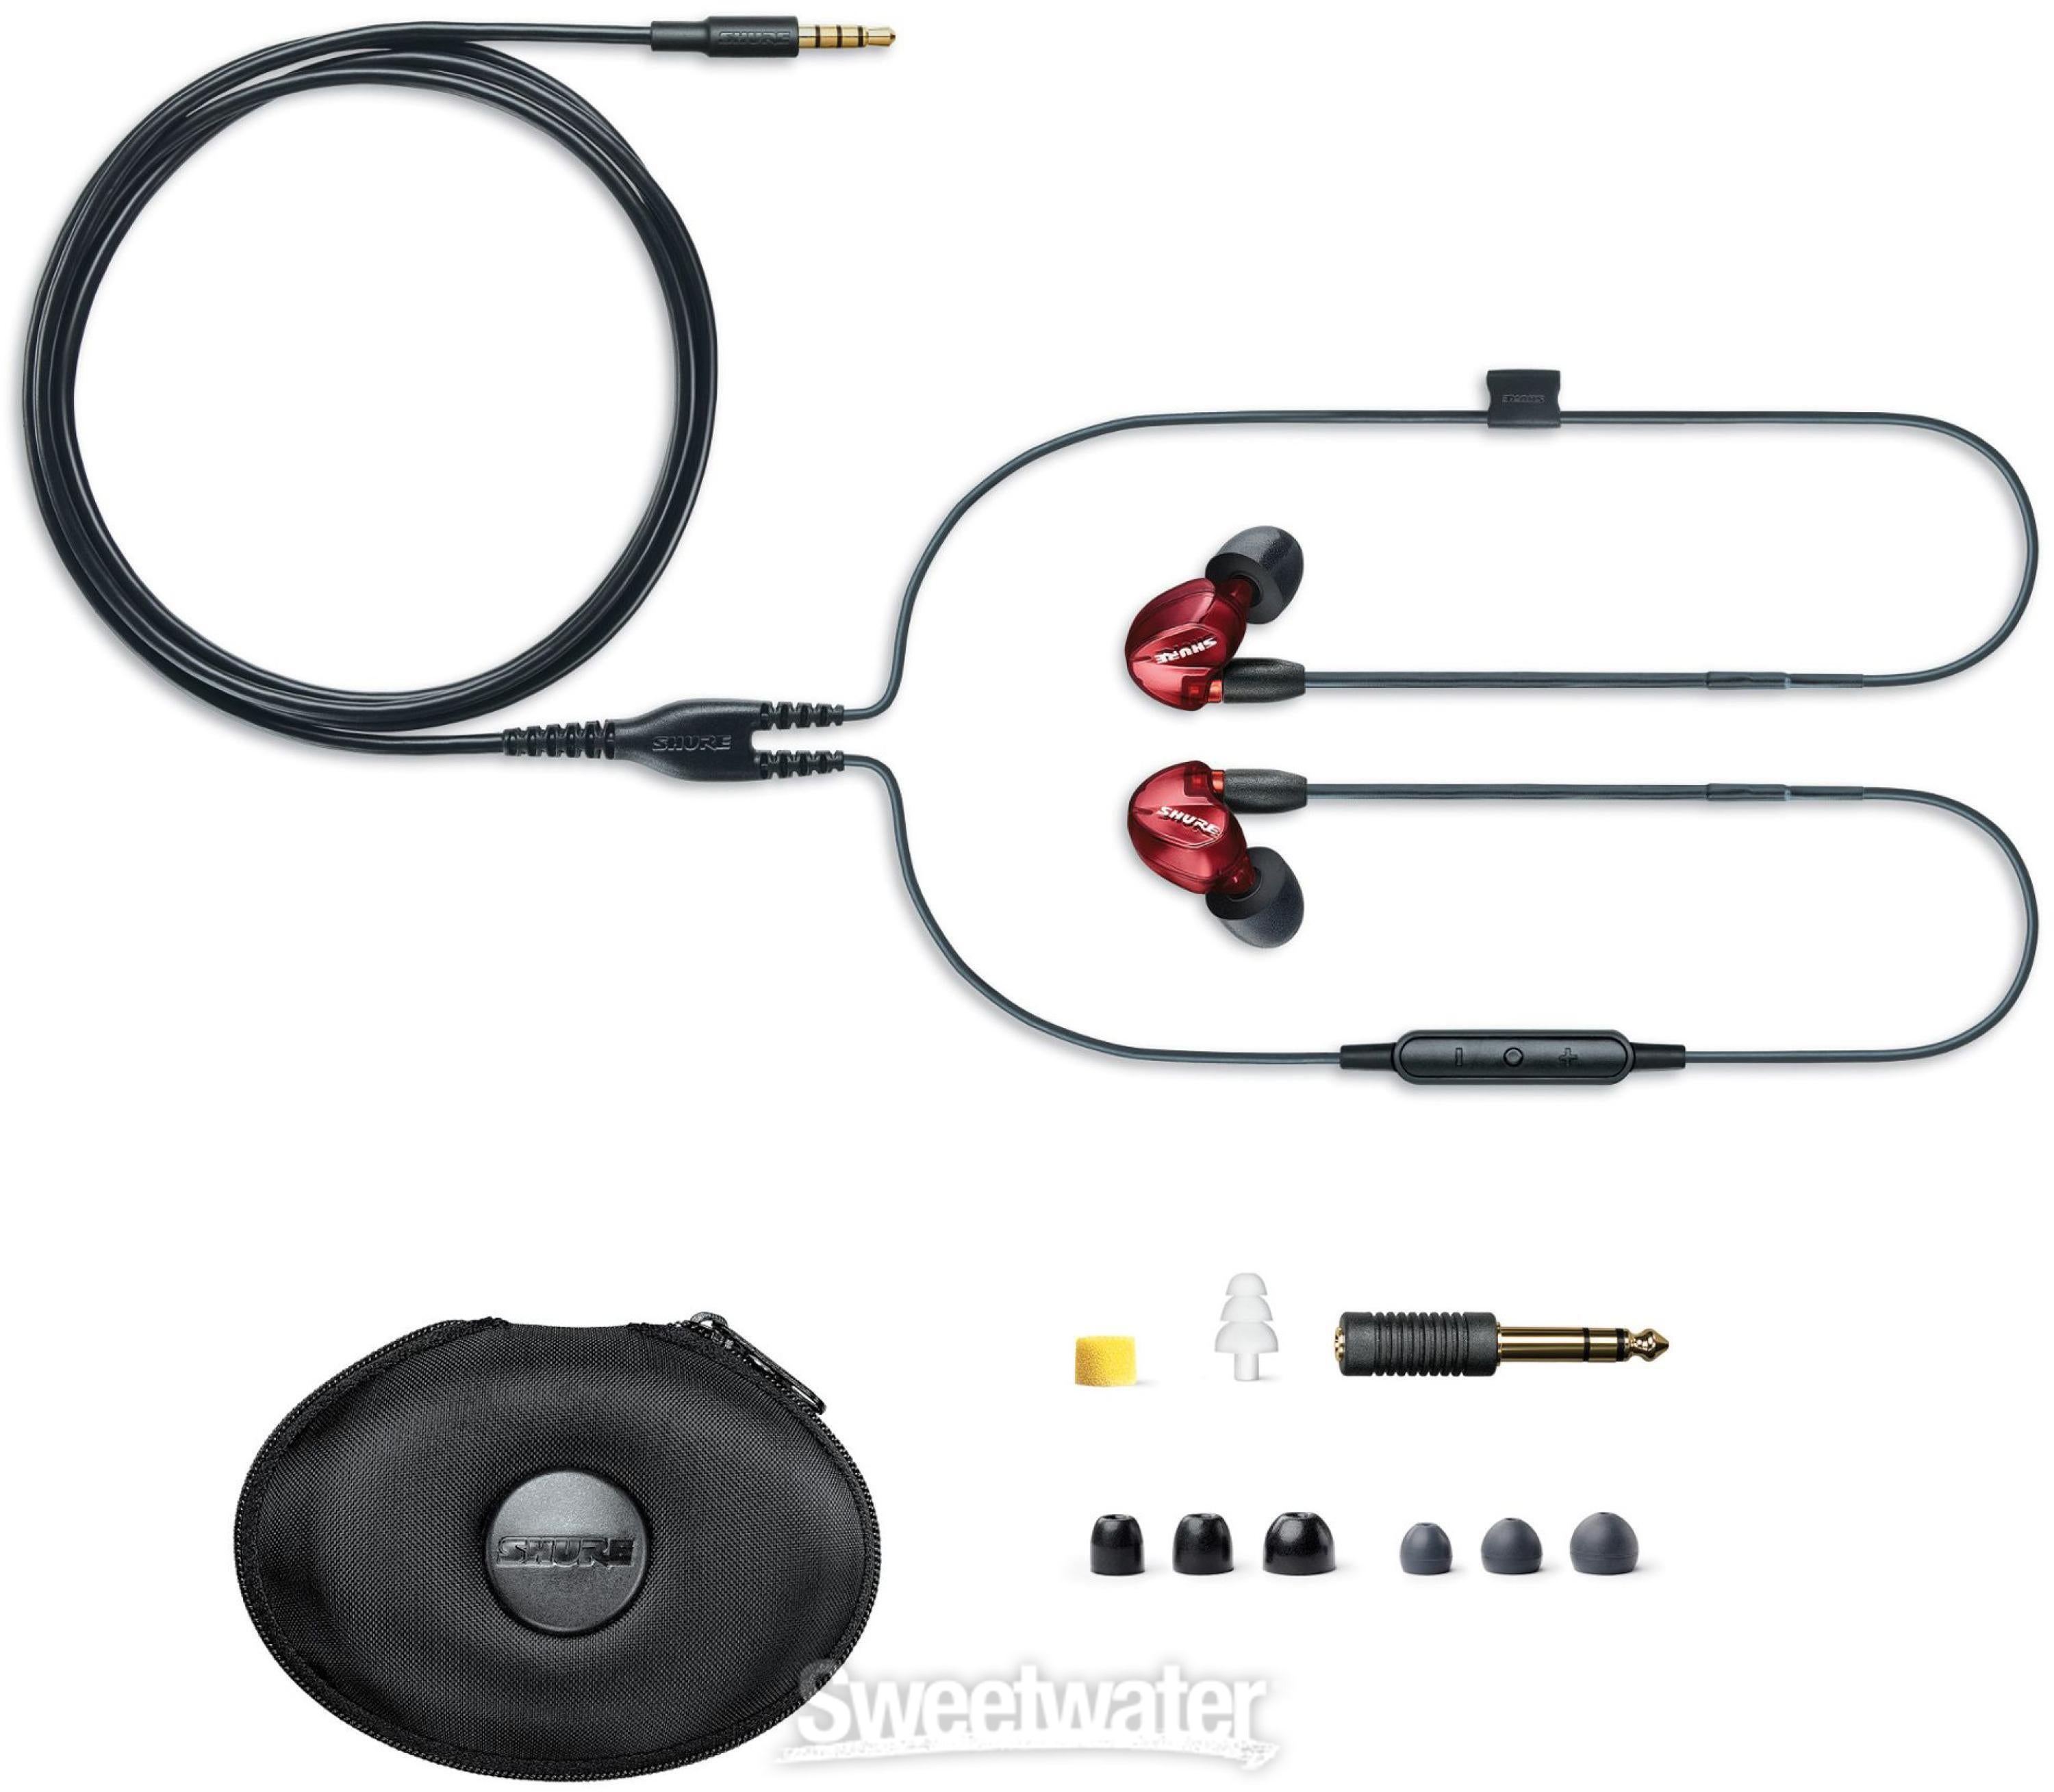 Shure SE535 Sound Isolating Earphones - Special Edition Red